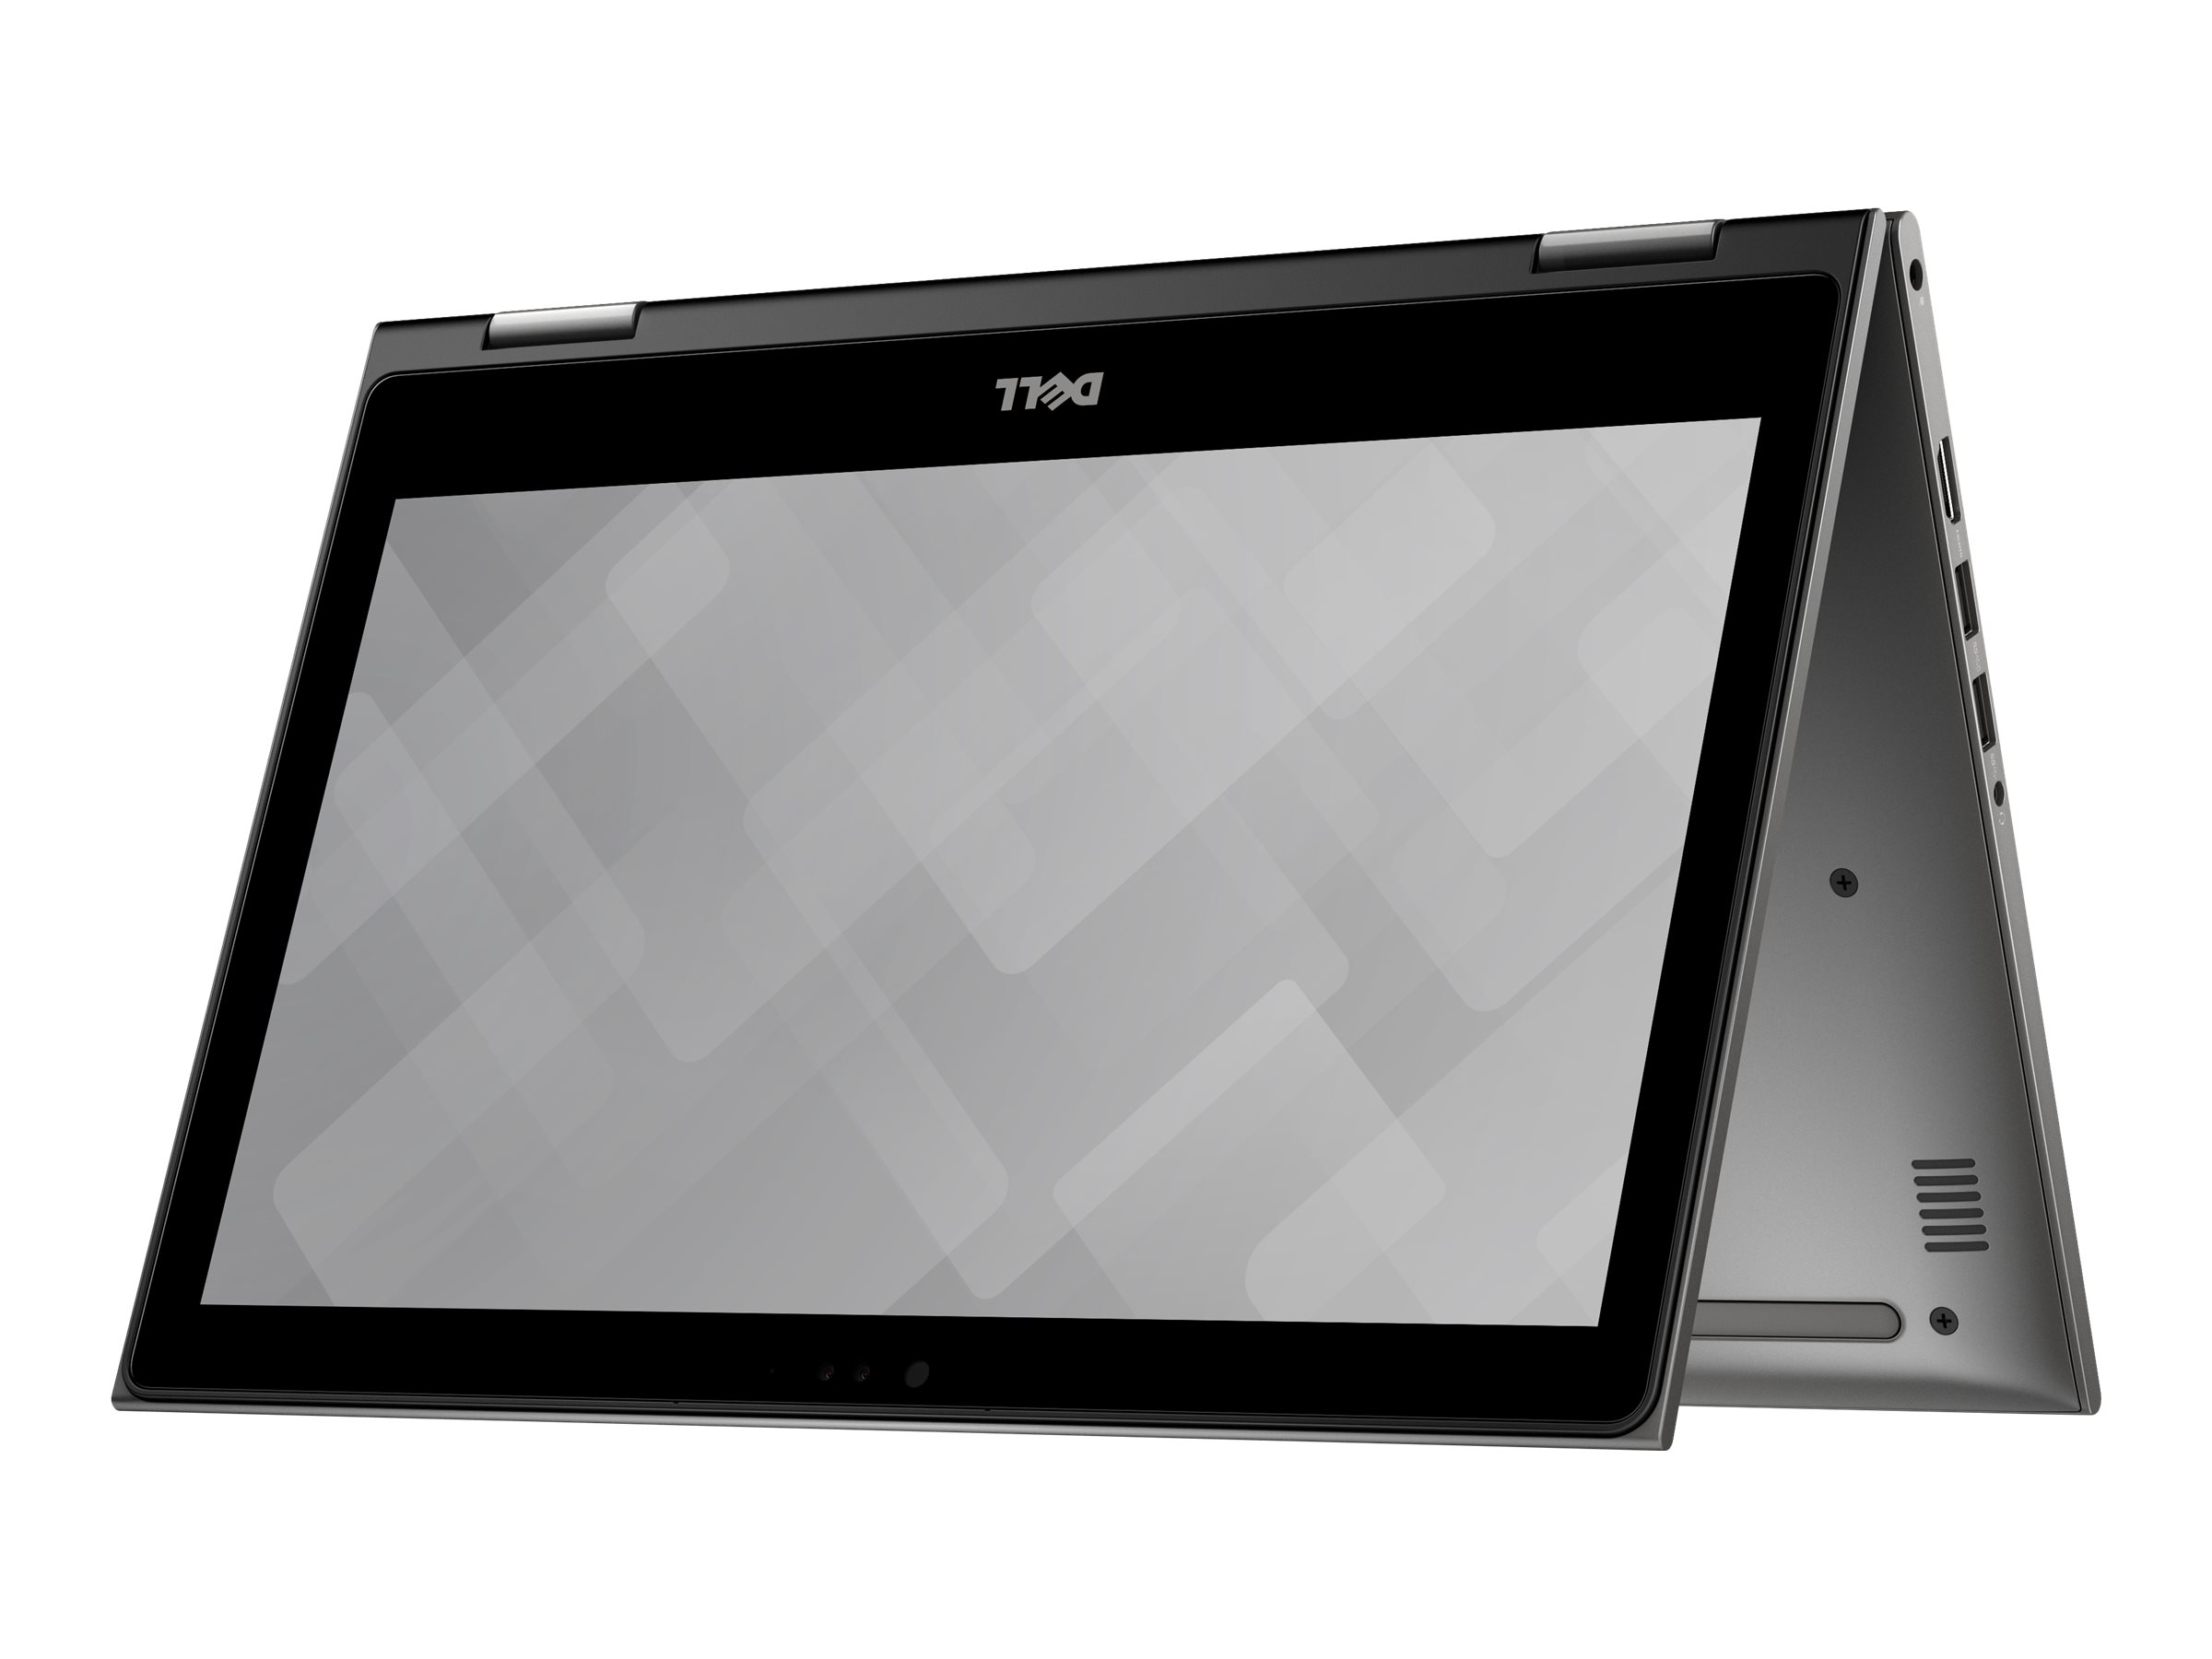 Inspiron 13 5368 2 in 1 Notebook - image 2 of 10